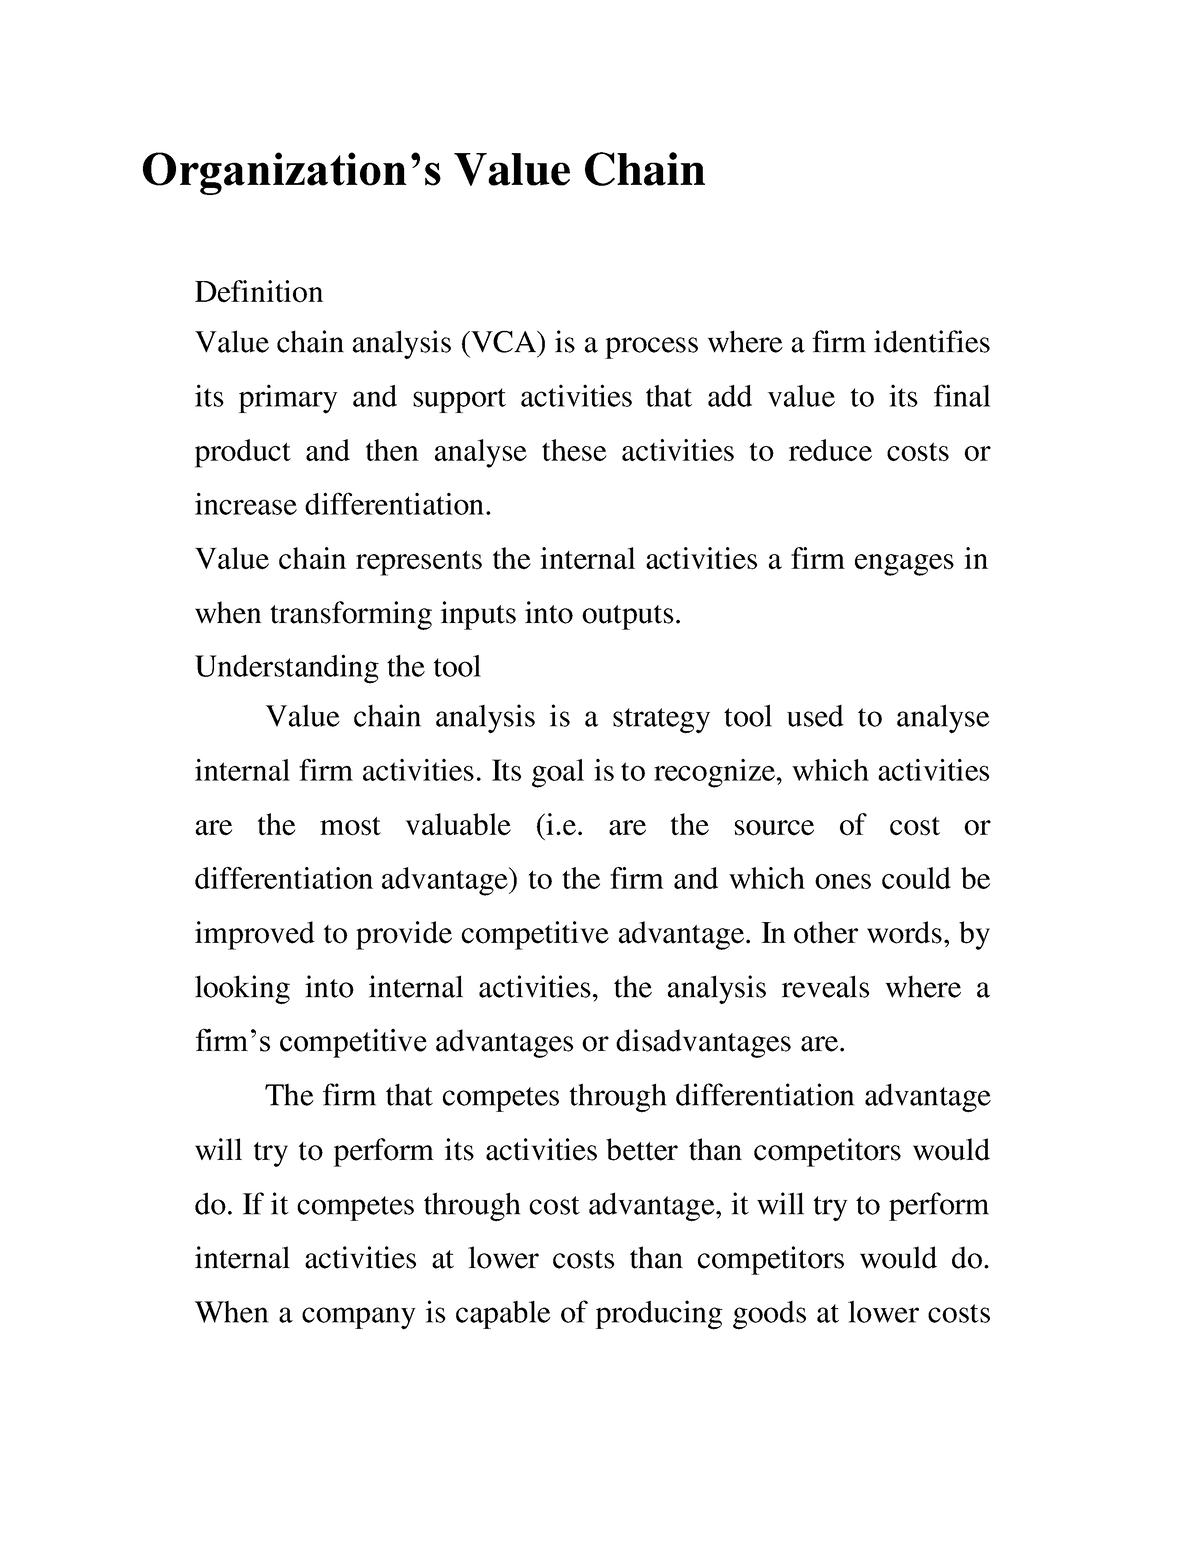 thesis on value chain management